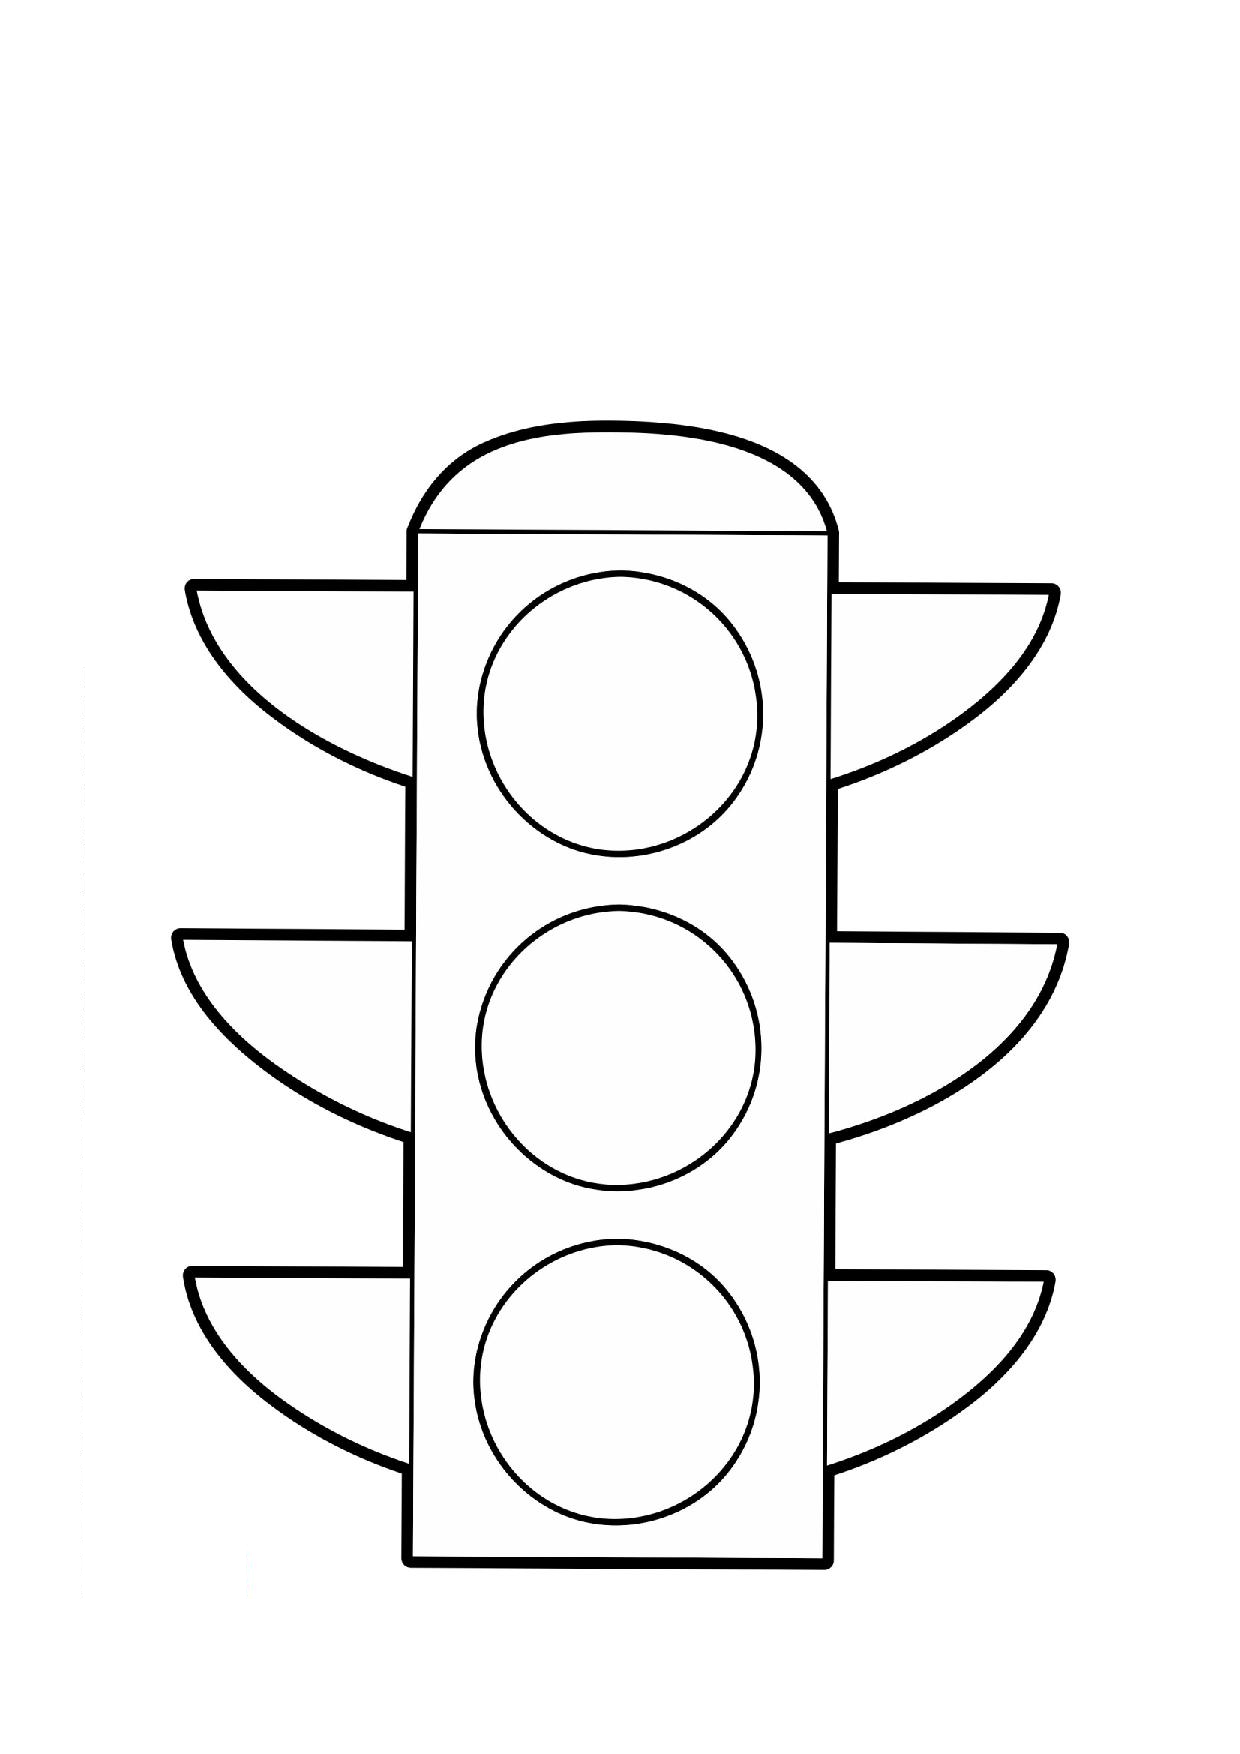 Traffic lights coloring pages pictures free printable